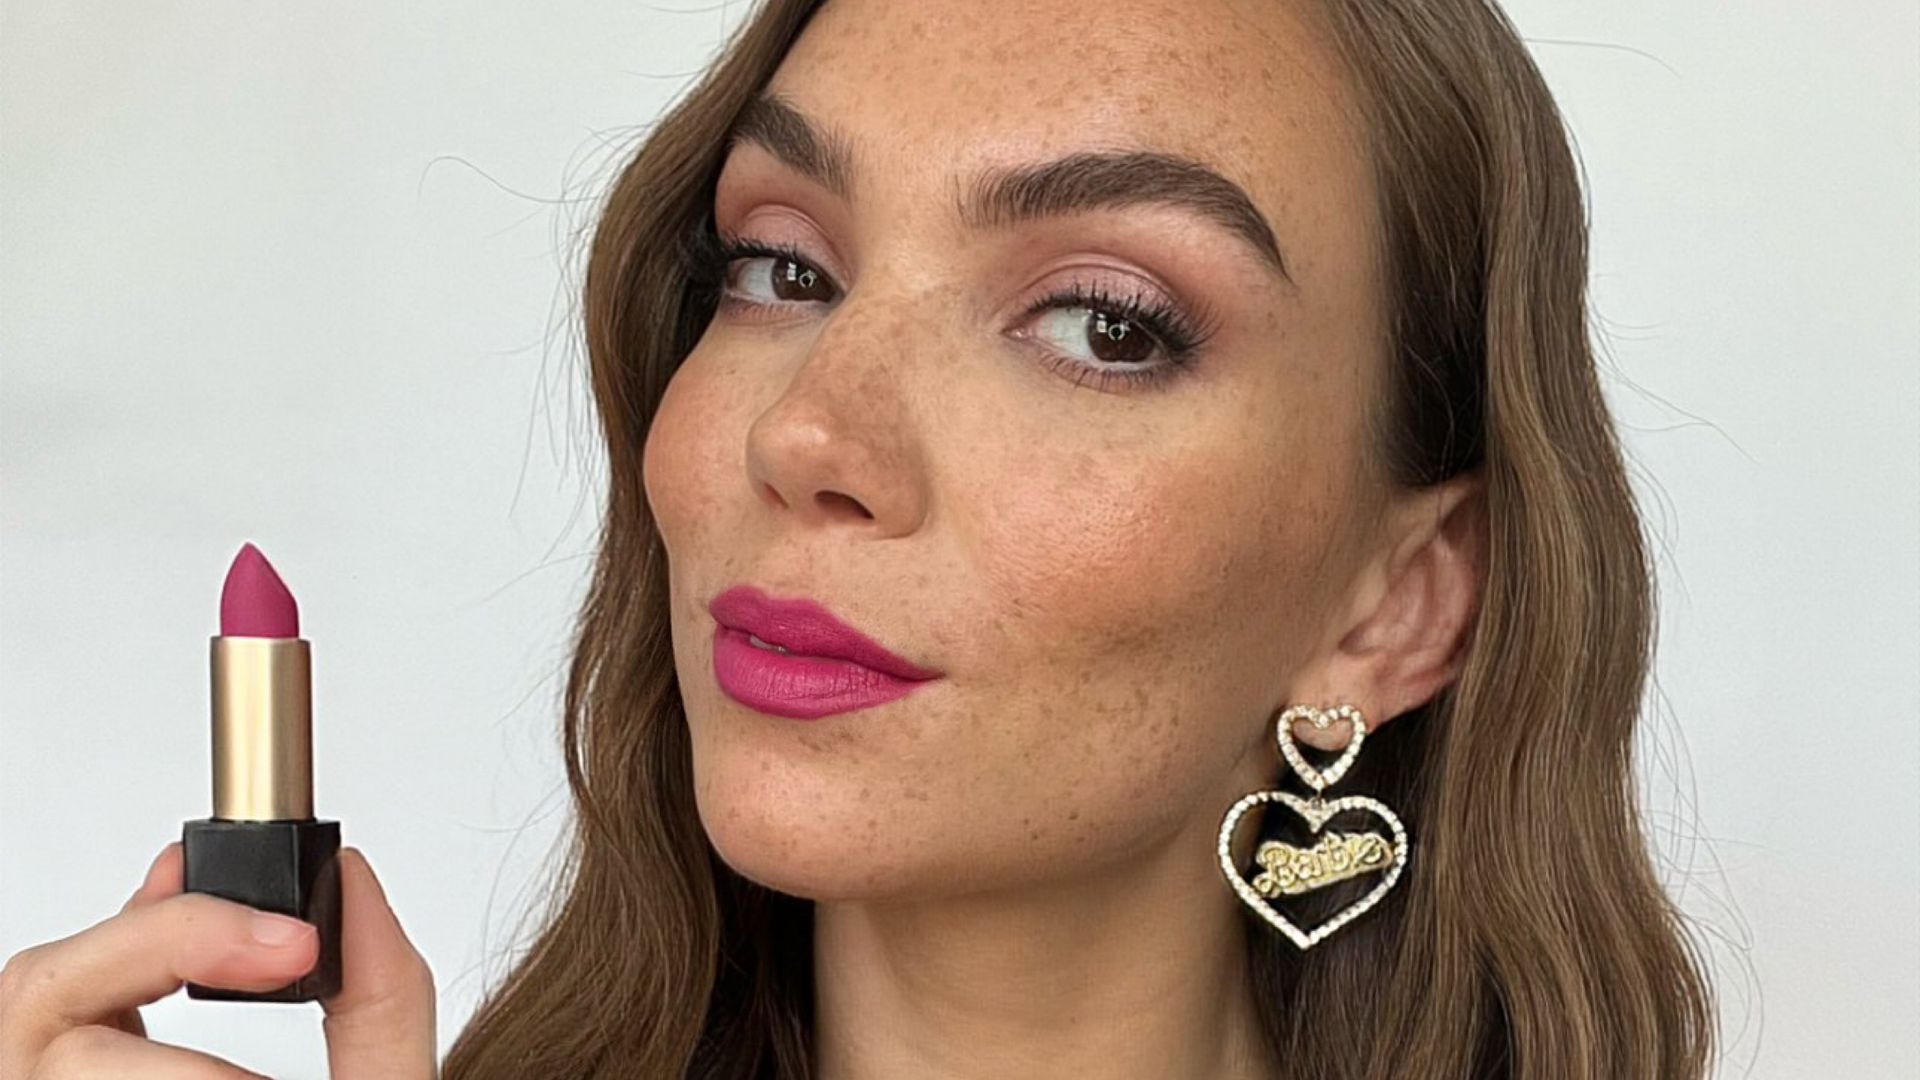 Makeup artist yasmin salmon holds a pink lipstick for a barbie inspired beauty look